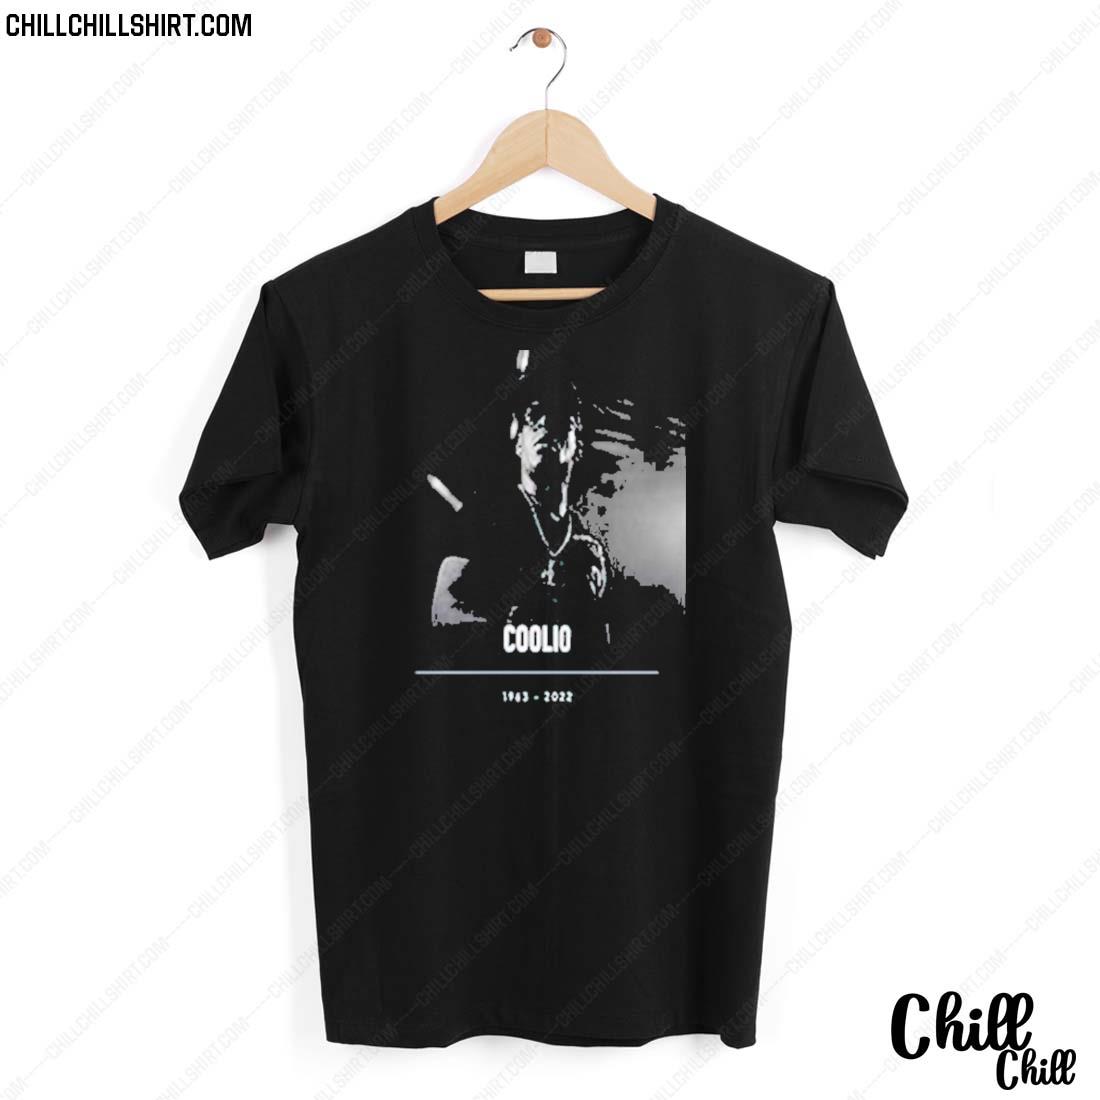 Nice rip Coolio 1963-2022 Thank You For The Memories T-shirt